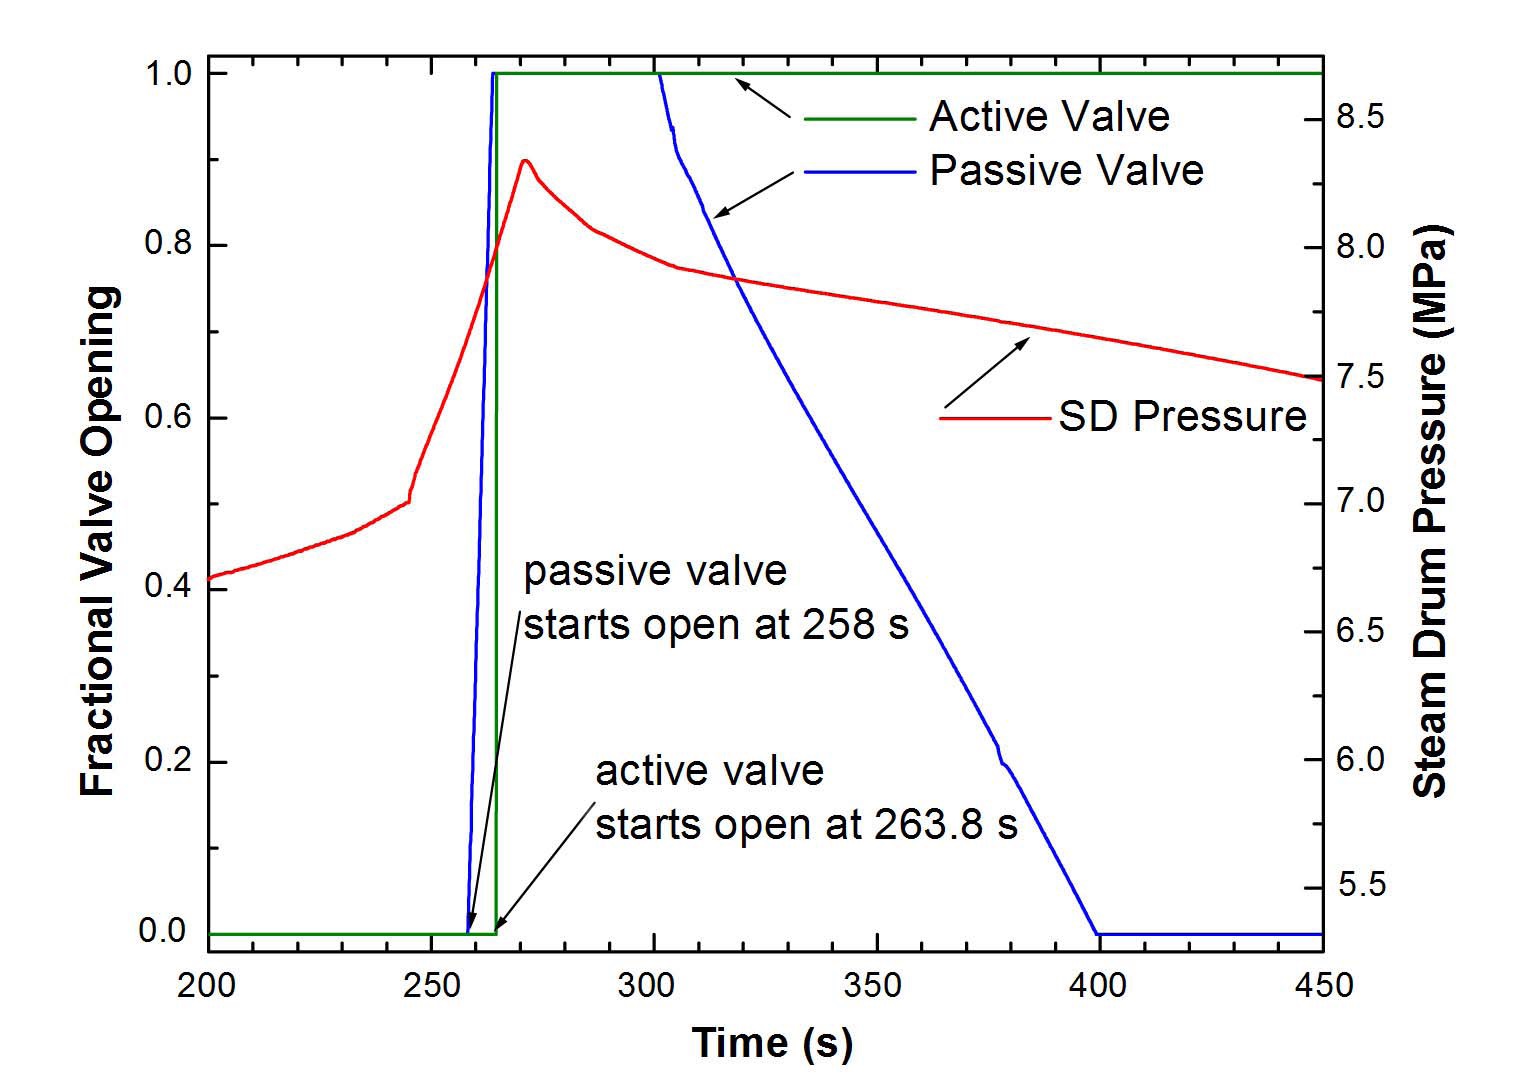 Valve Opening with Pressure Evolution for Chernobyl-like Accident